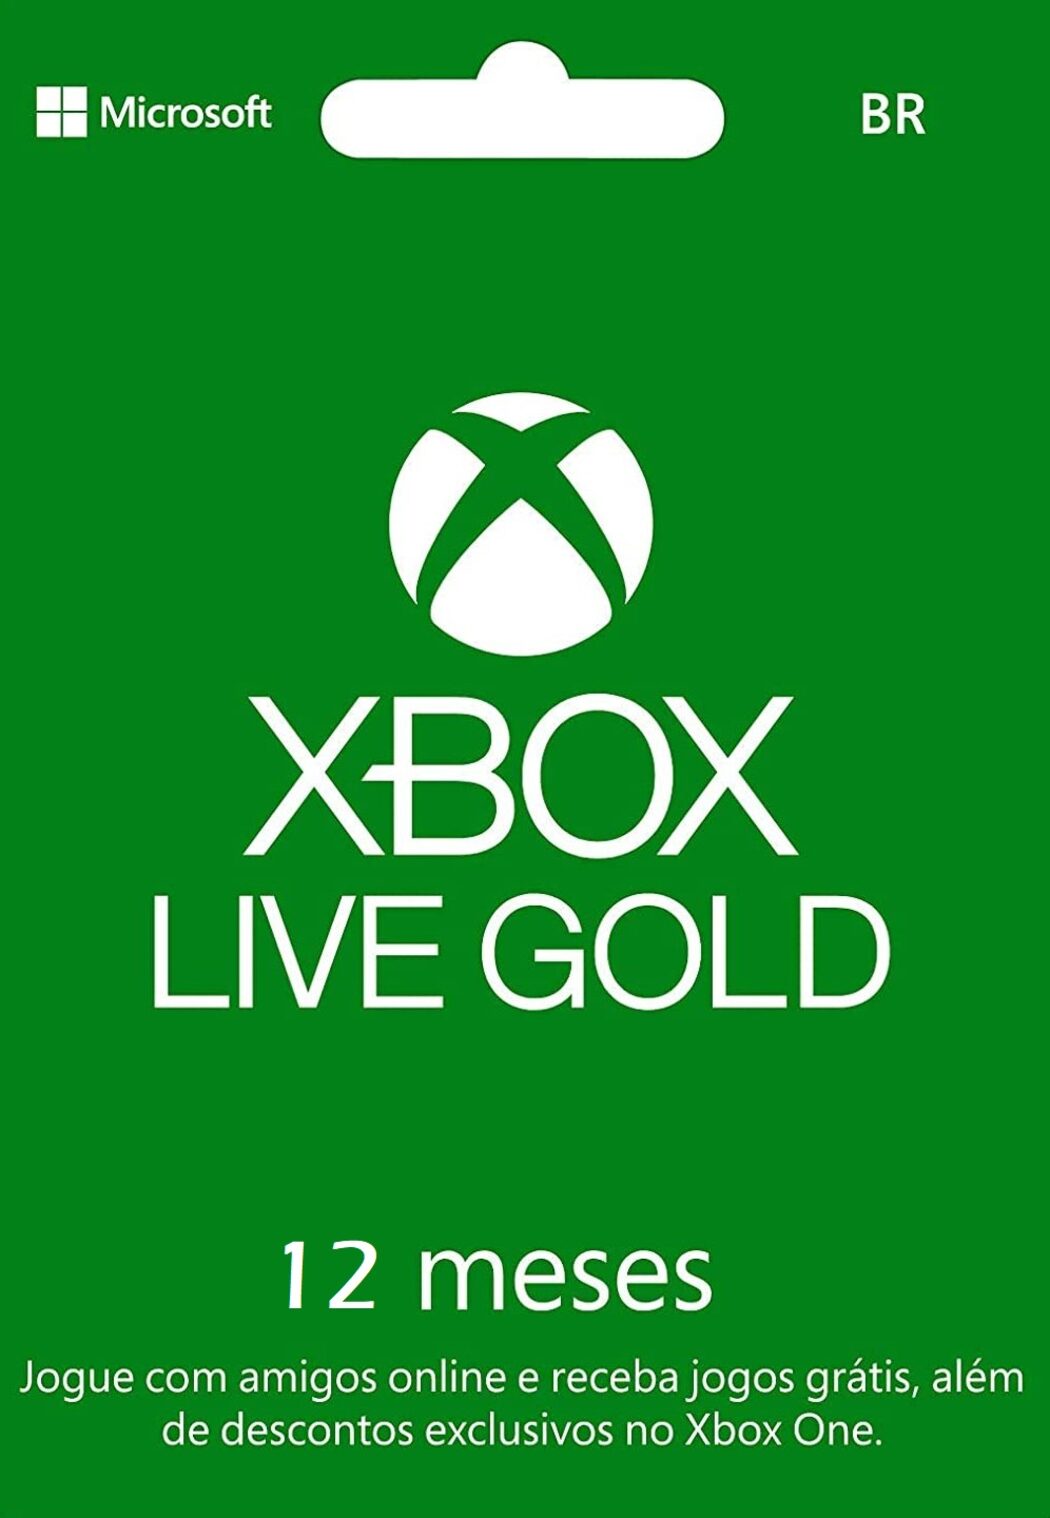 Ministry Outflow Complain Xbox Live Gold 12 months | Cheaper Xbox membership! | ENEBA